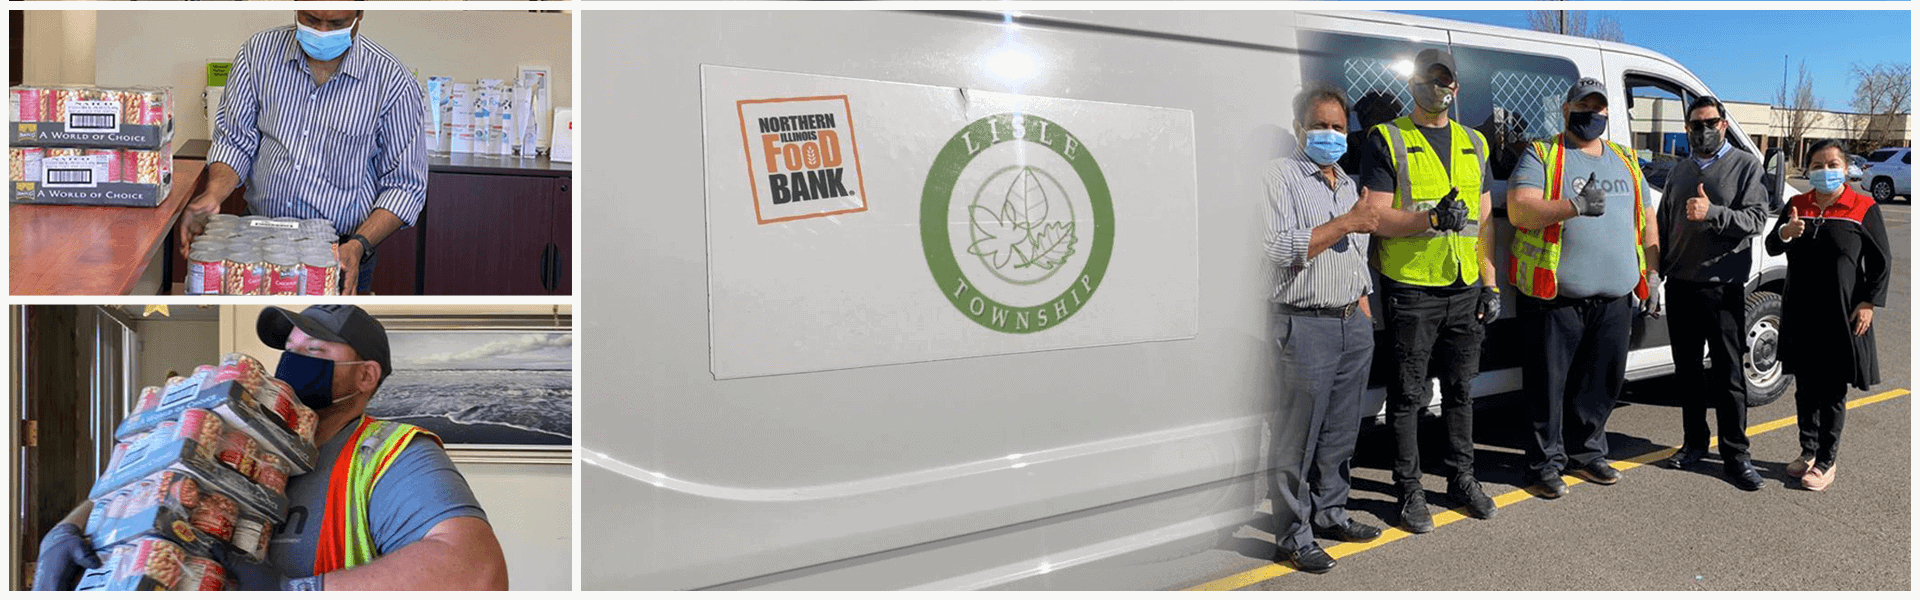 rSTAR Gives Back with Lisle Township Food Drive